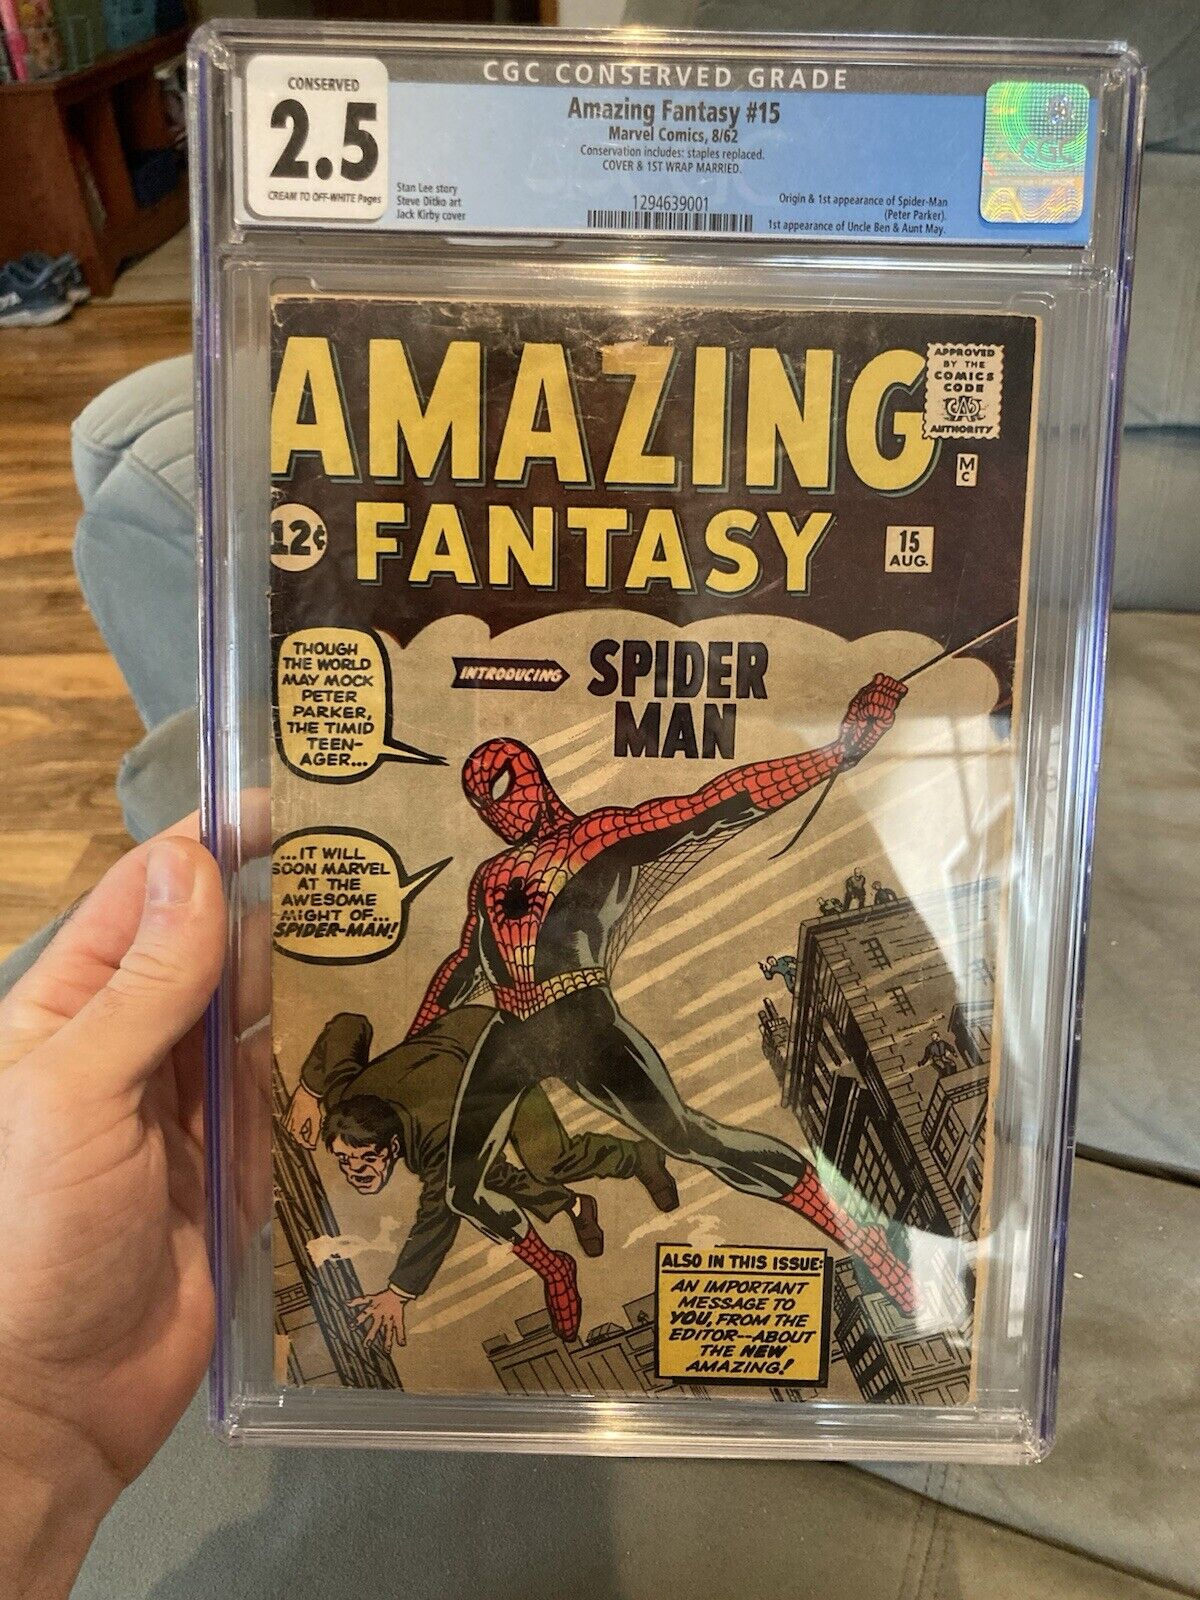 Amazing Fantasy 15 Conserved 2.5 CGC ASM Ann 1 4.5 CGC Ultimate Fallout 4 9.6cgc